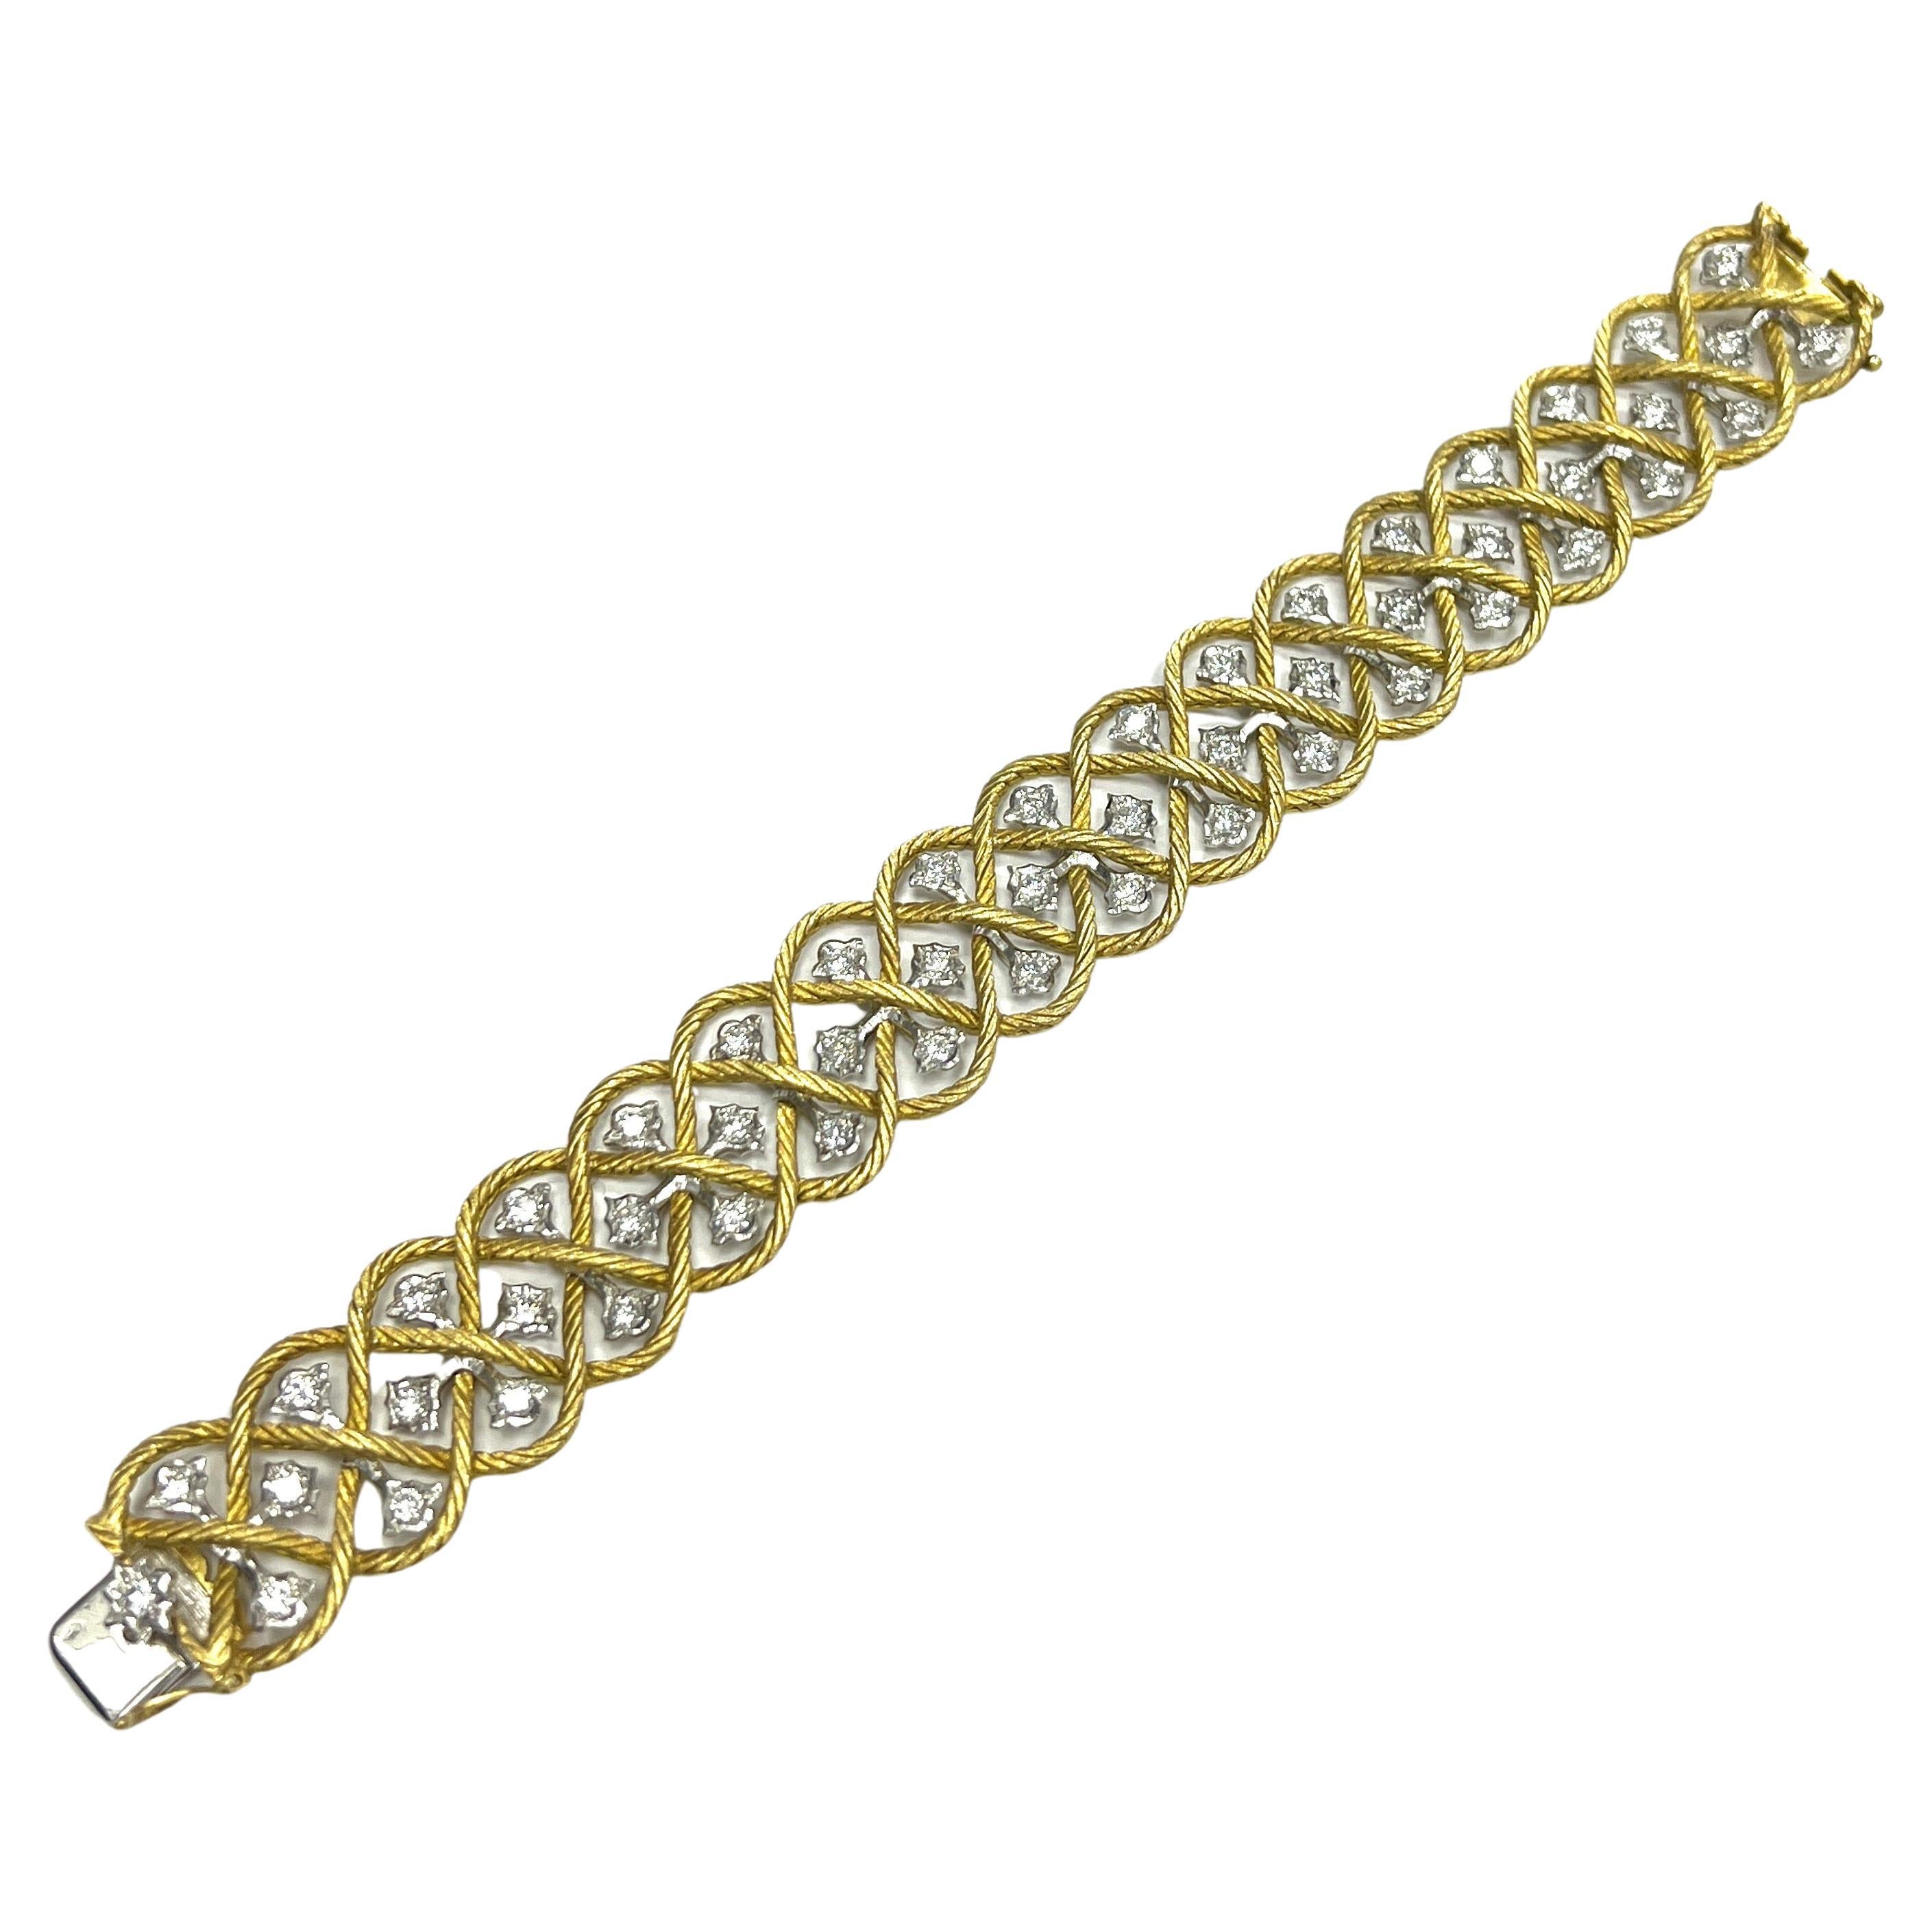 Buccellati diamond gold bracelet, Italian

Created by Gianmaria Buccellati, an 18 karat yellow gold bracelet with braided rope motif, round-cut diamonds; marked Gianmaria Buccellati, 18kt, Italy, 750

Size: width 0.81 inch, length 7 inches
Total